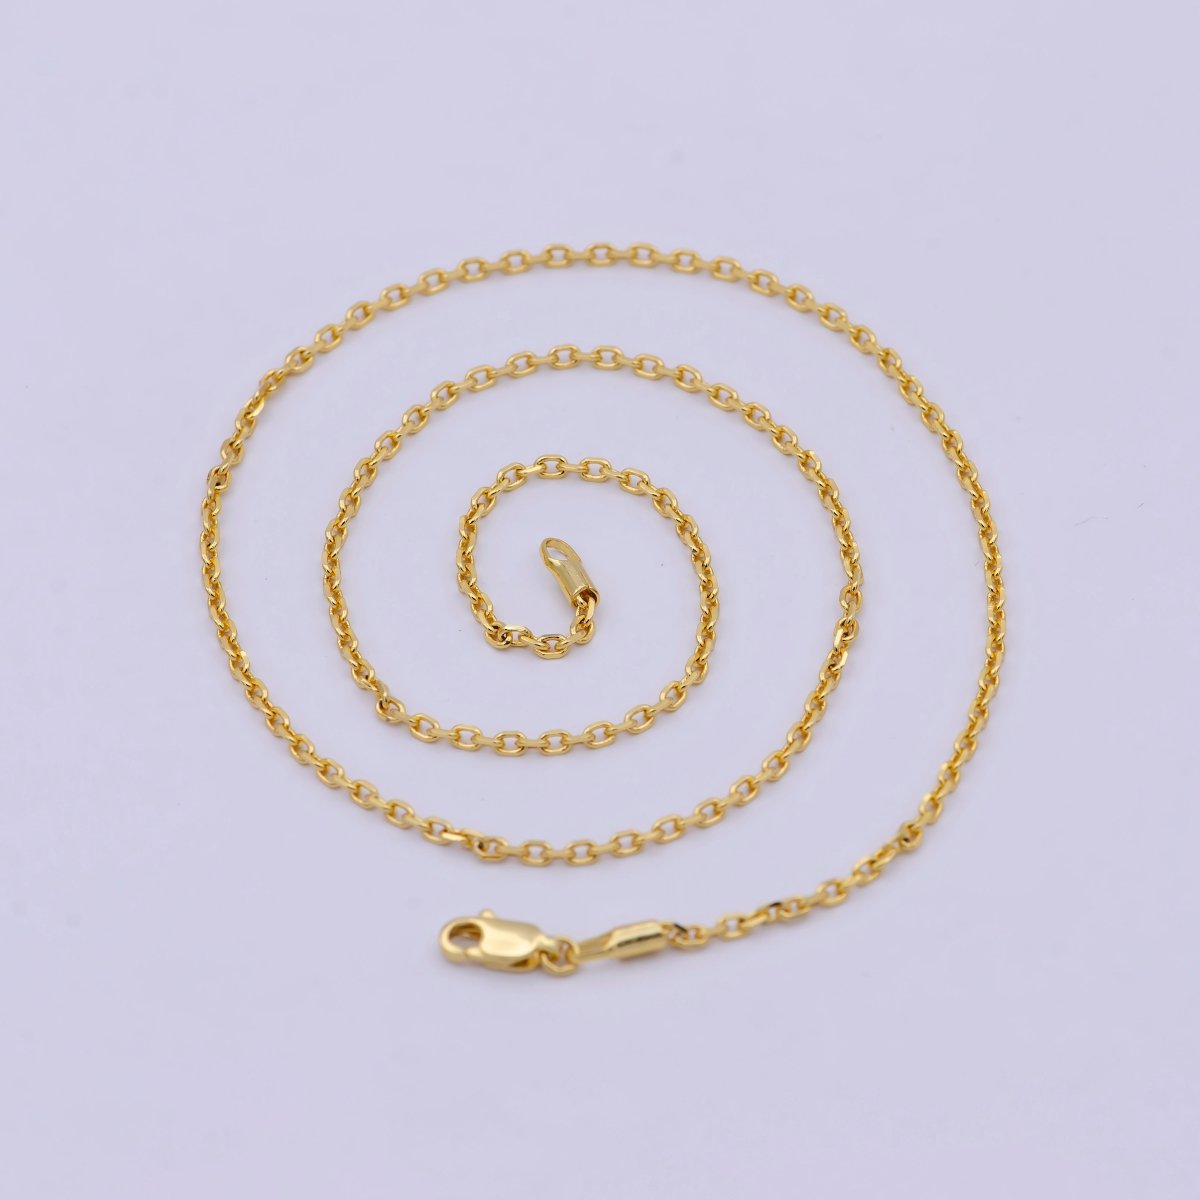 19.7'' Ready to Use 24K Gold Filled Thin Cable Necklace Chain, Layering Cable Chain Dainty Necklace, For Pendant Charm Necklace Making WA-743 - DLUXCA